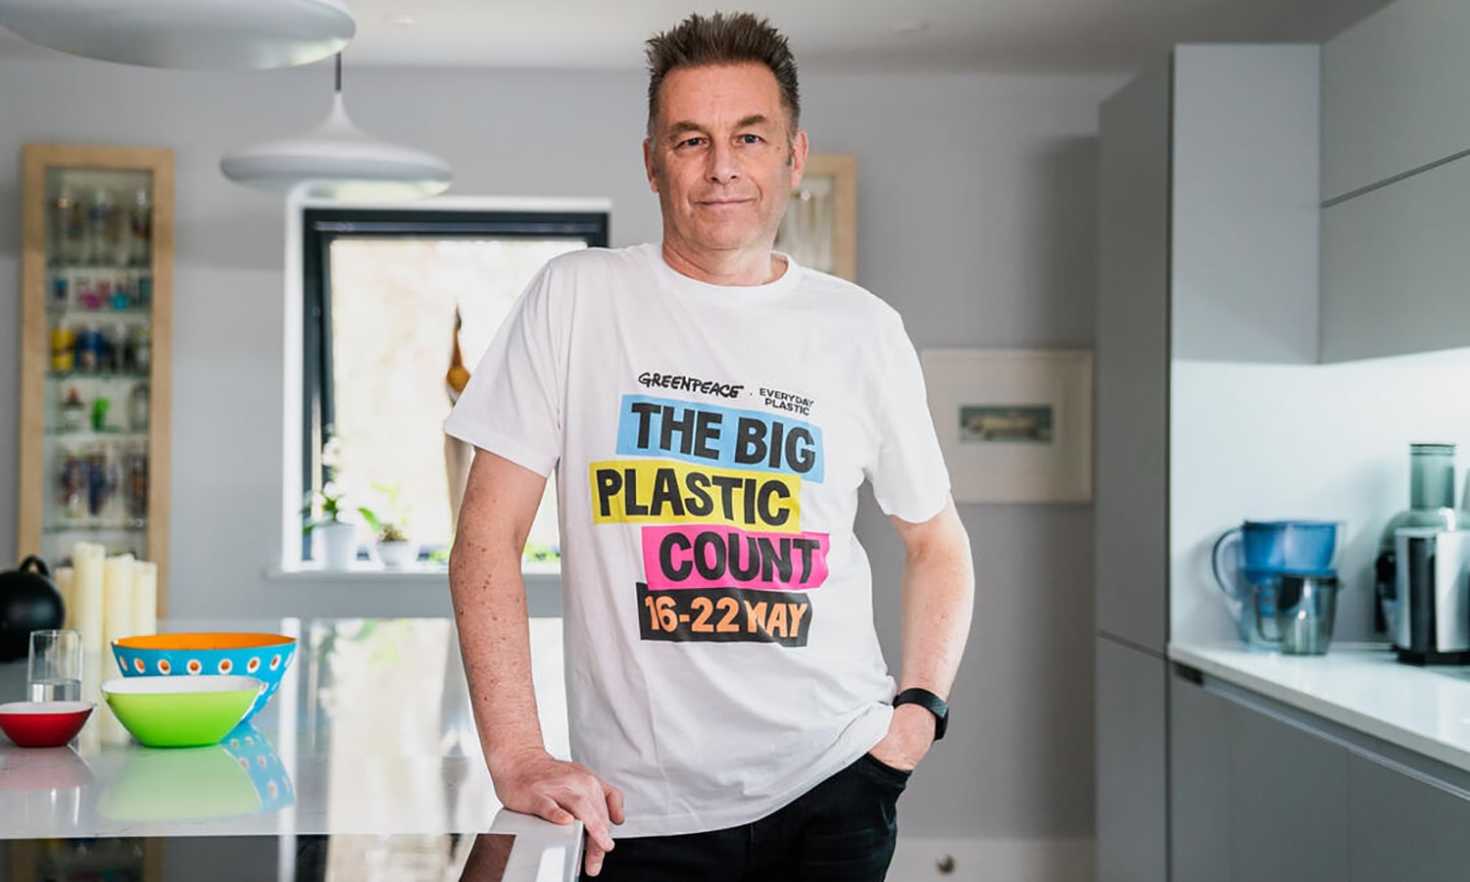 Chris Packham CBE, Wildlife Expert, TV Presenter, Author and Conservationist, joins "The Big Plastic Count" run by Greenpeace and Everyday Plastic. 